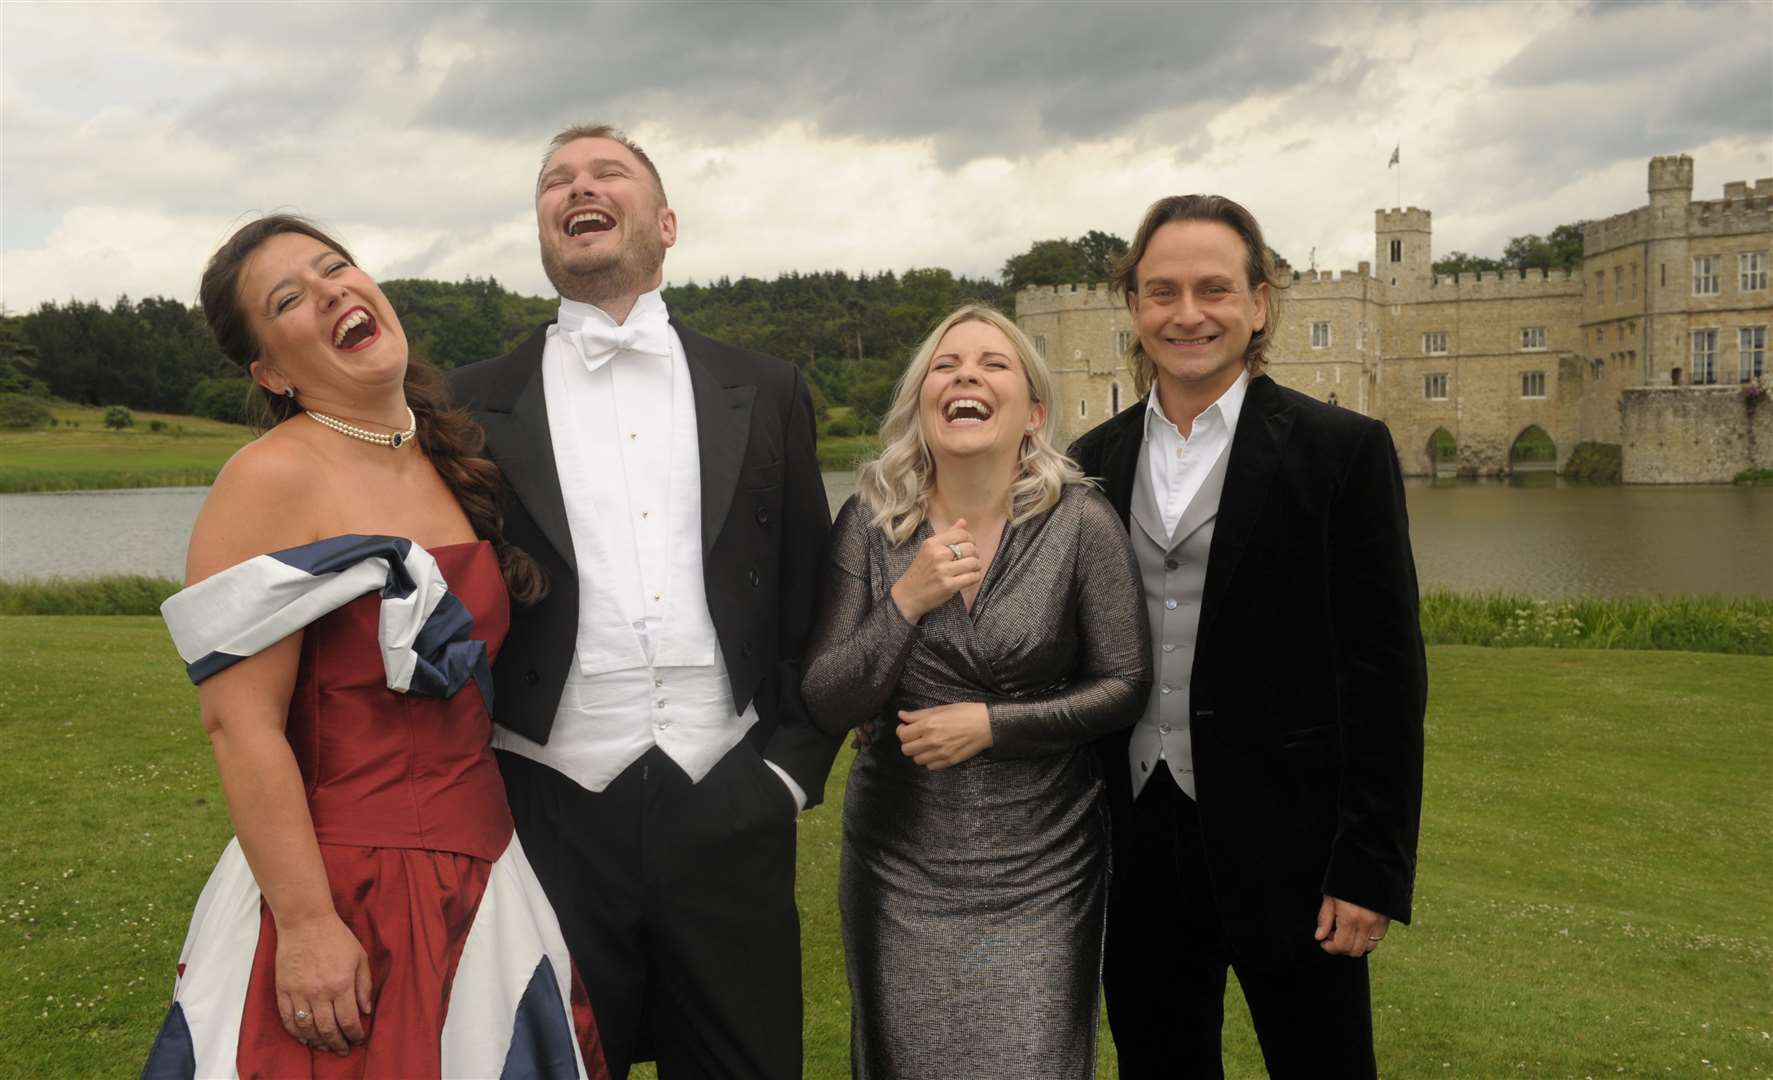 Last year's soloists have fun ahead of the concert with Louise Dearman third from left - but what will she wear this year? Picture: Steve Crispe